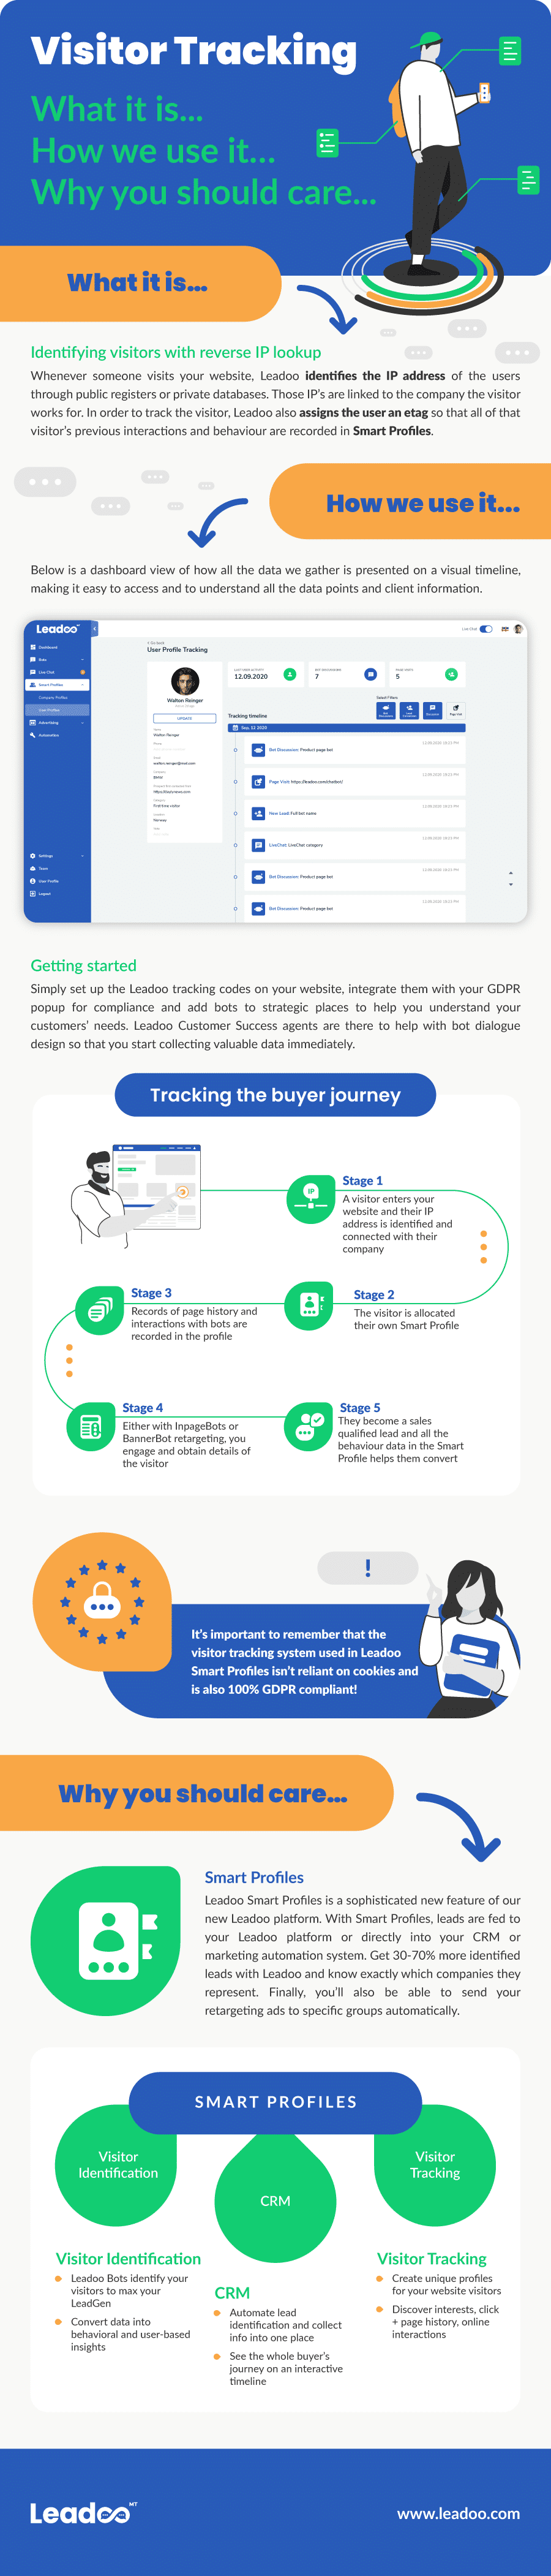 Visitor Tracking infographic visitor tracking Leadoo Visitor Tracking Explained